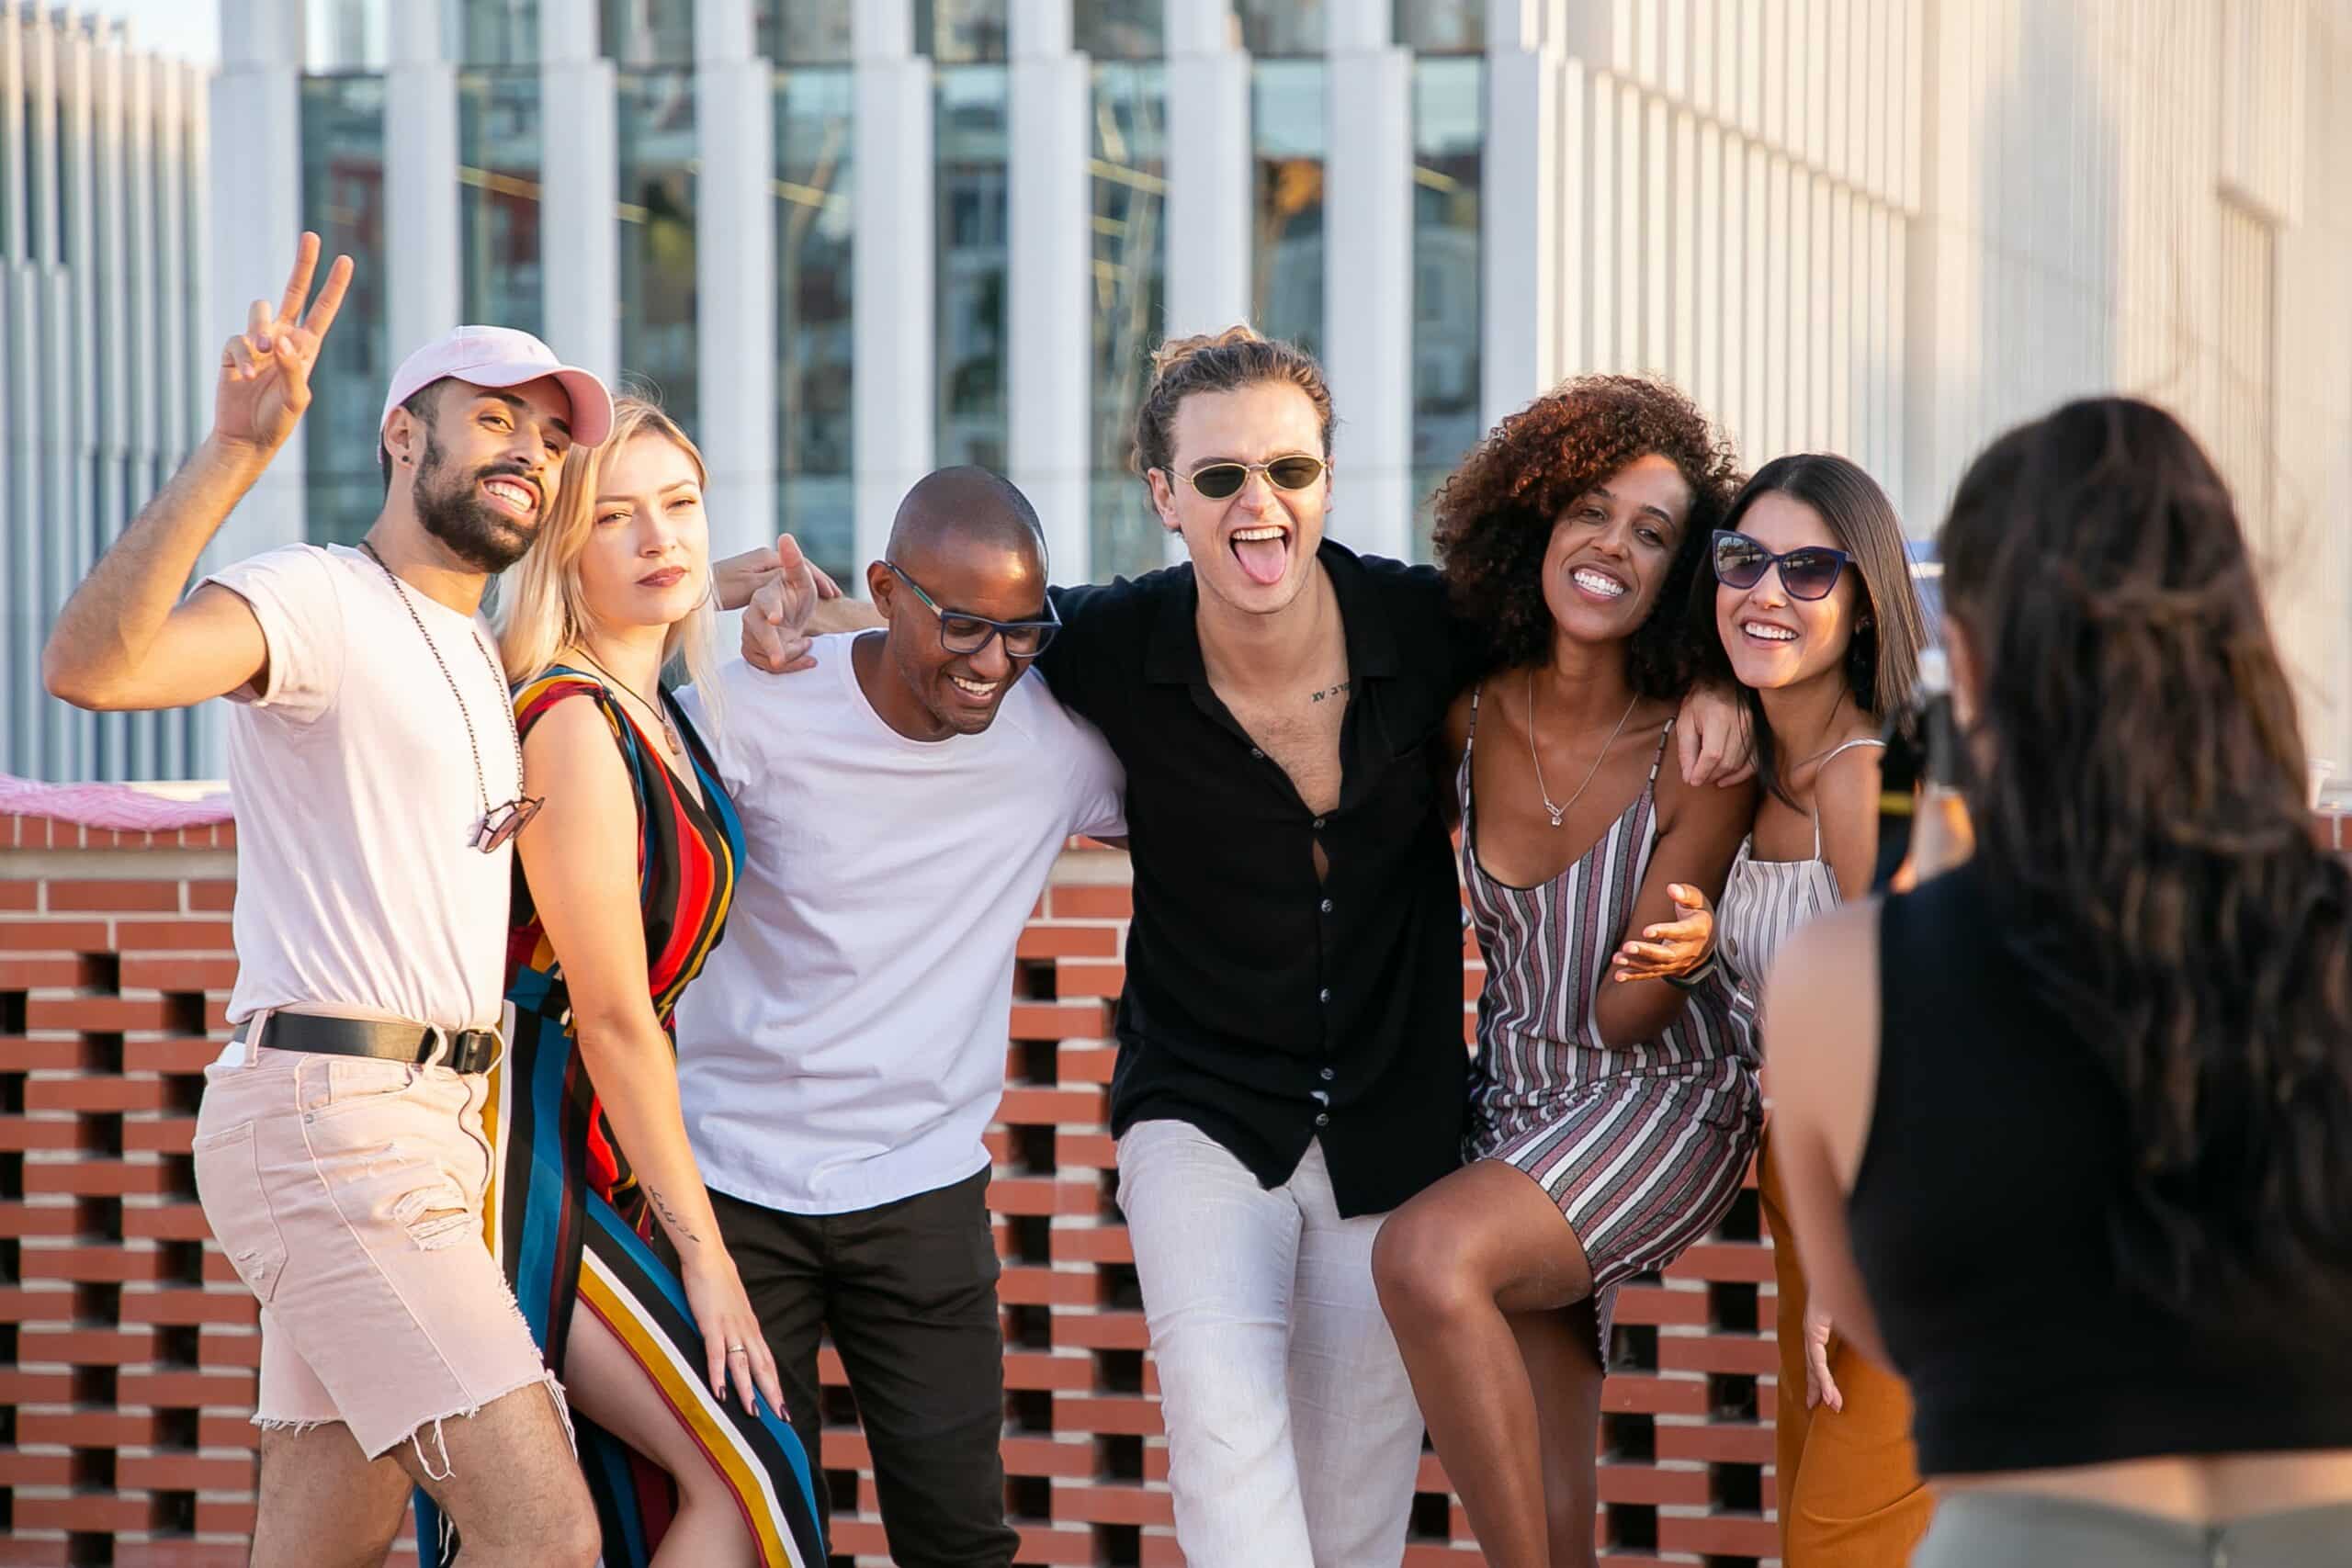 Outdoor Event Photo by Kampus Production: https://www.pexels.com/photo/faceless-lady-taking-photo-of-positive-diverse-millennials-during-open-air-party-5935257/